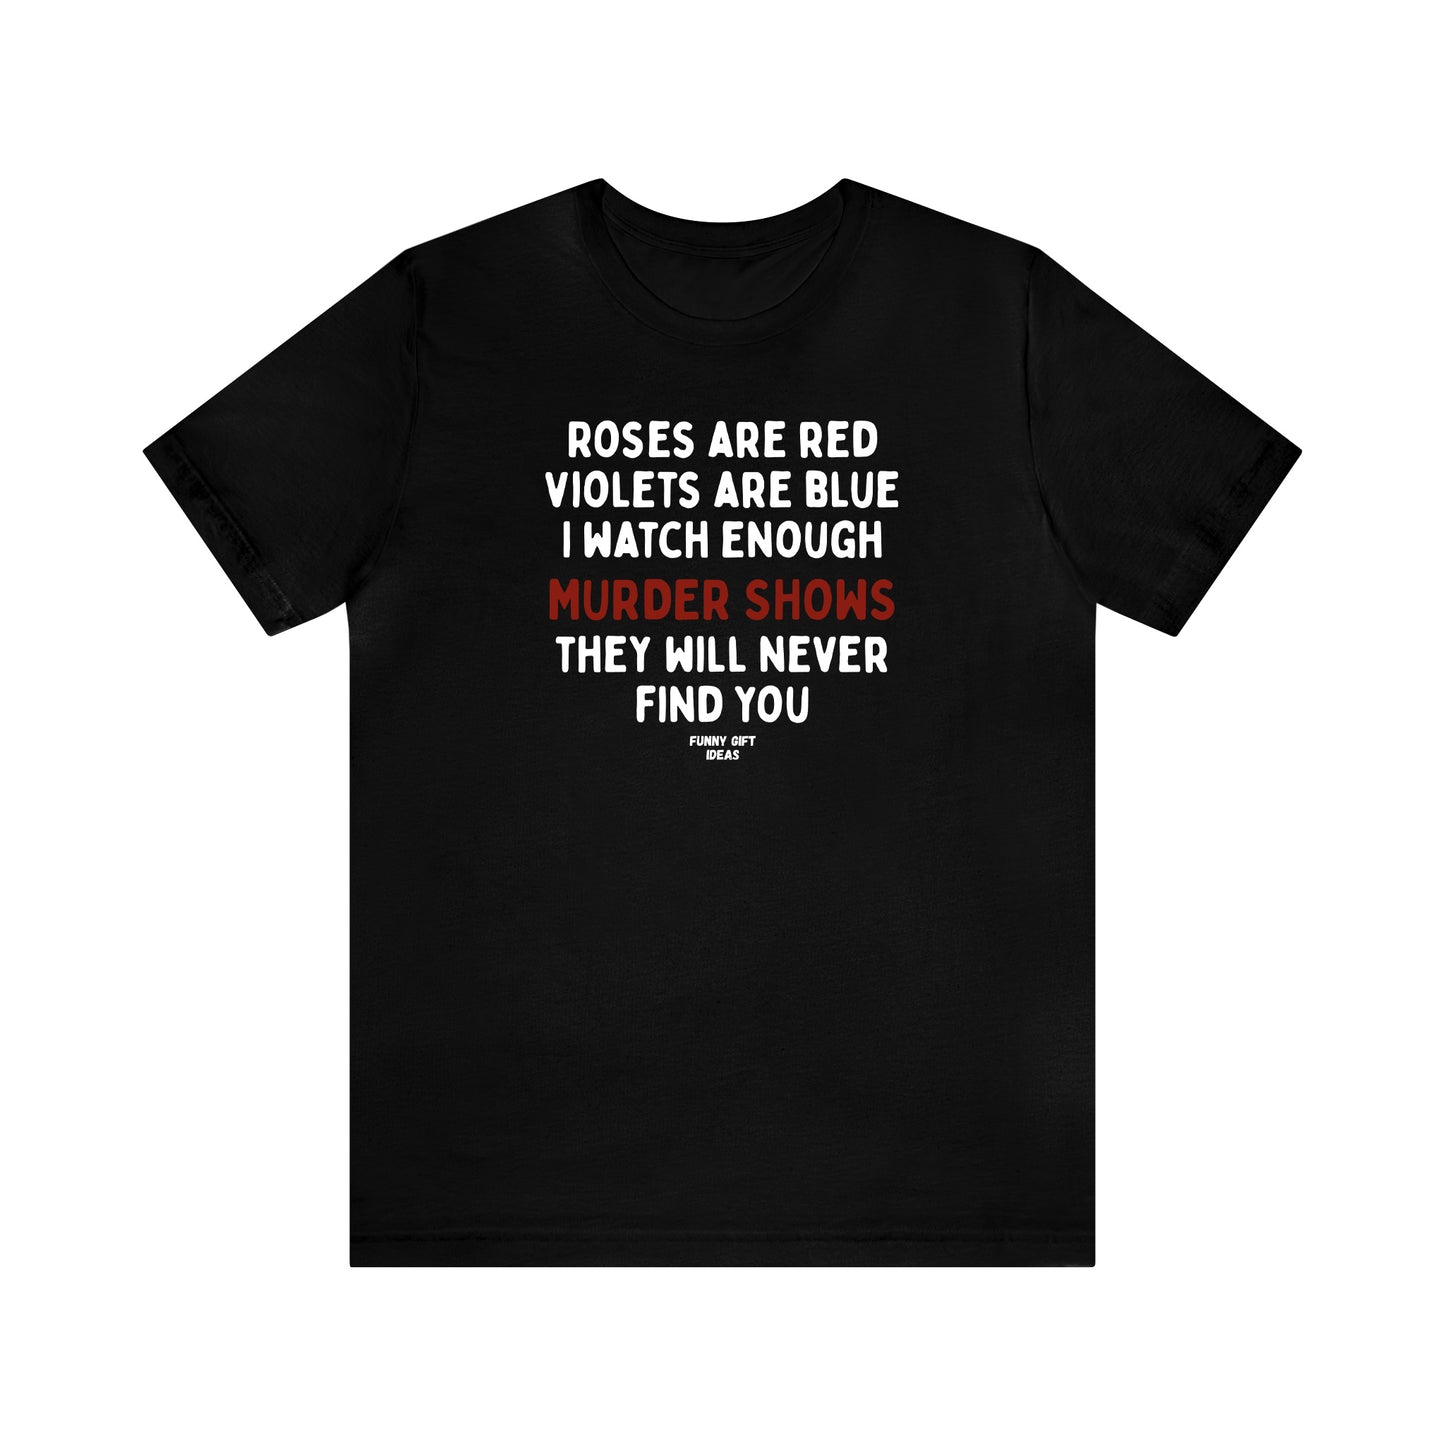 Funny Shirts for Women - Roses Are Red Violets Are Blue I Watch Enough Murder Shows They Will Never Find You - Women's T Shirts